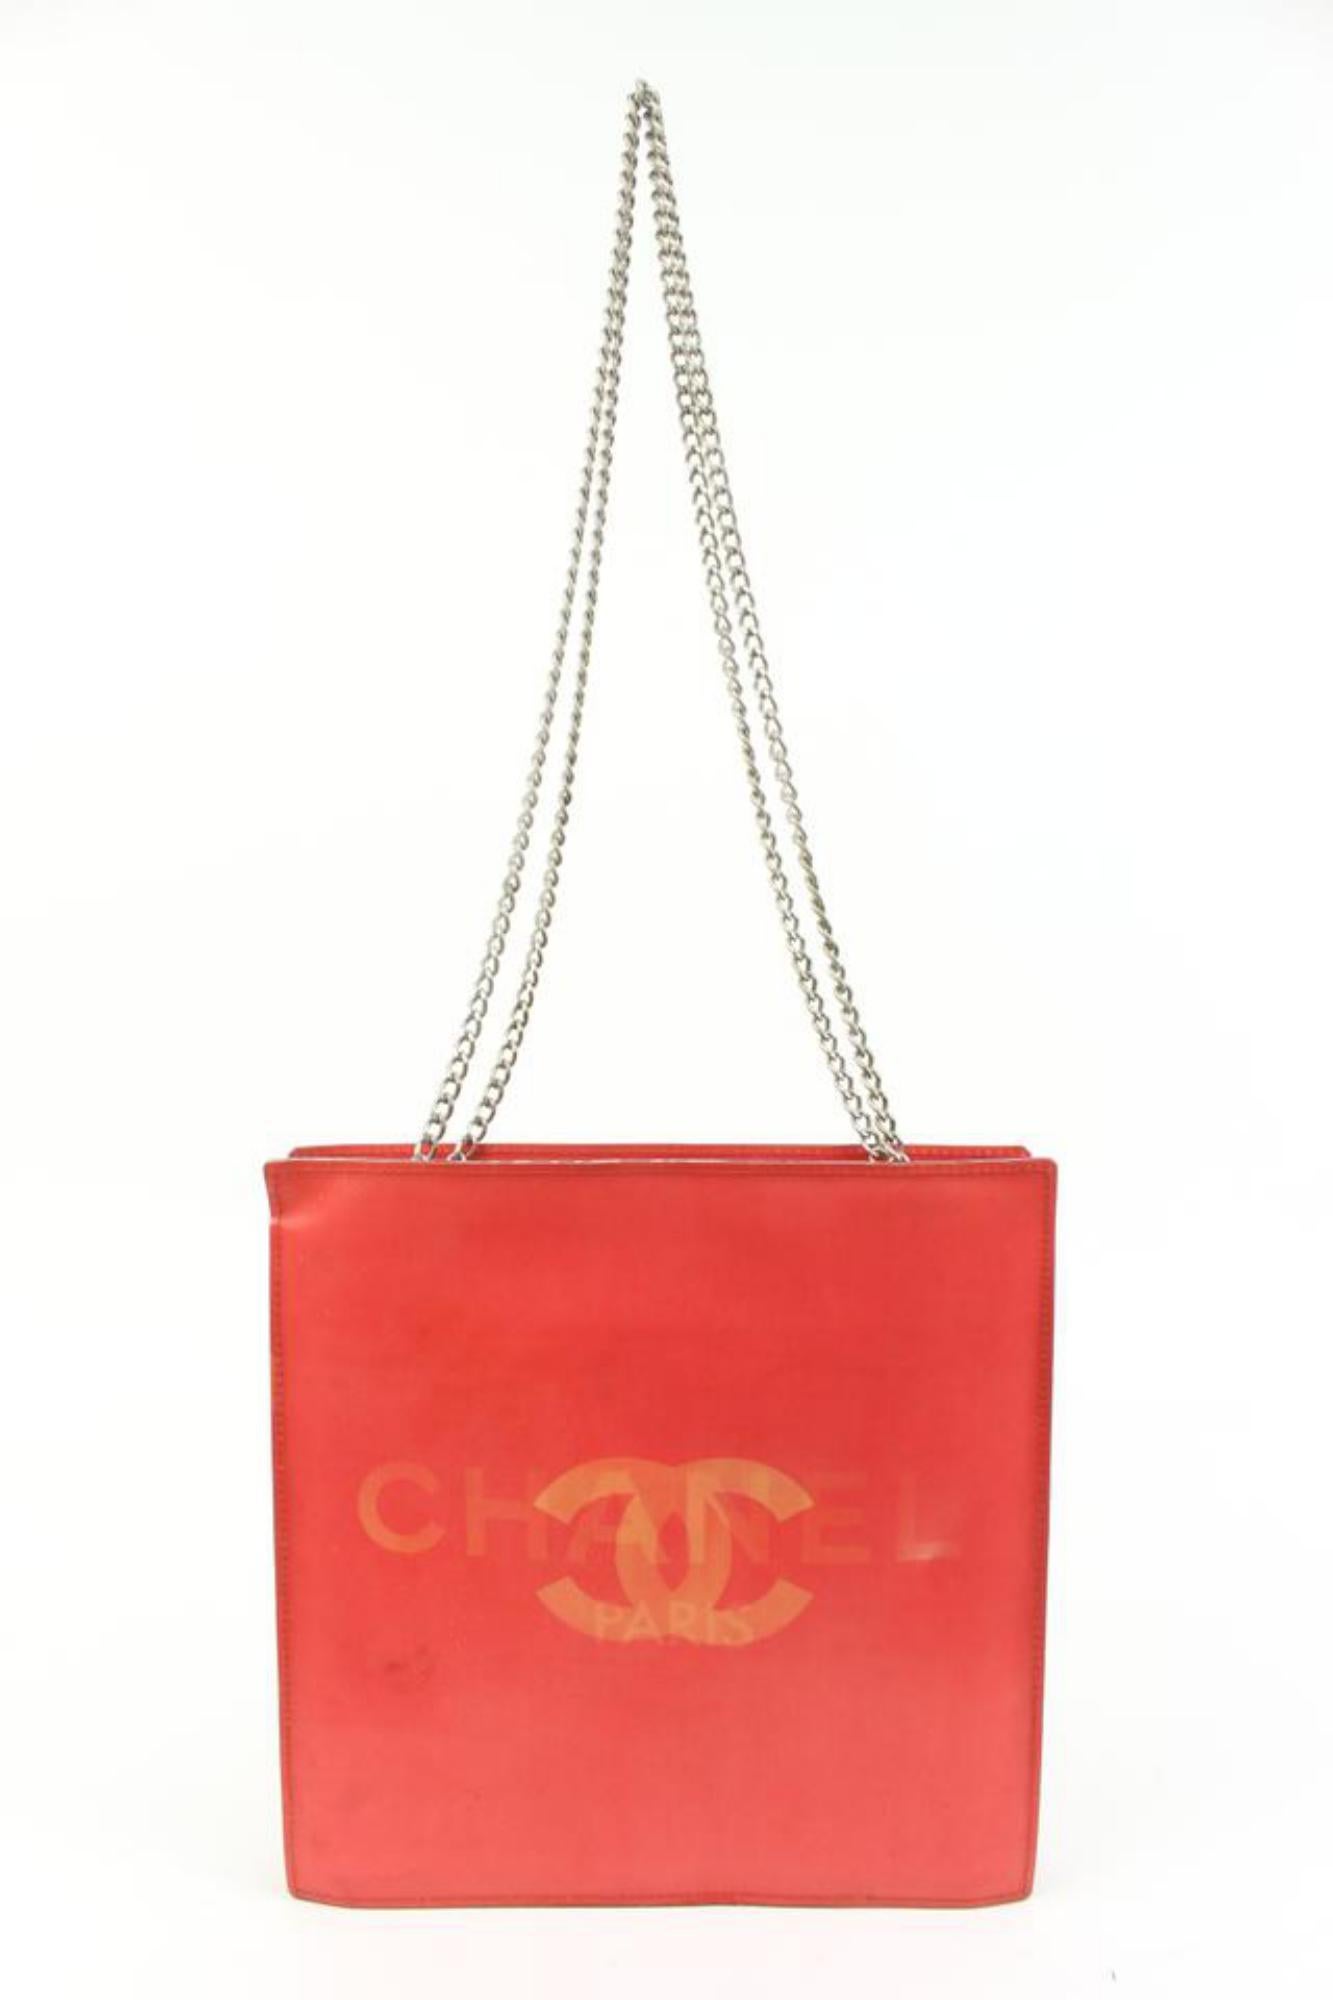 Chanel Red Holographic CC Logo Chain Tote Hologram Bag 4ck726a For Sale 4